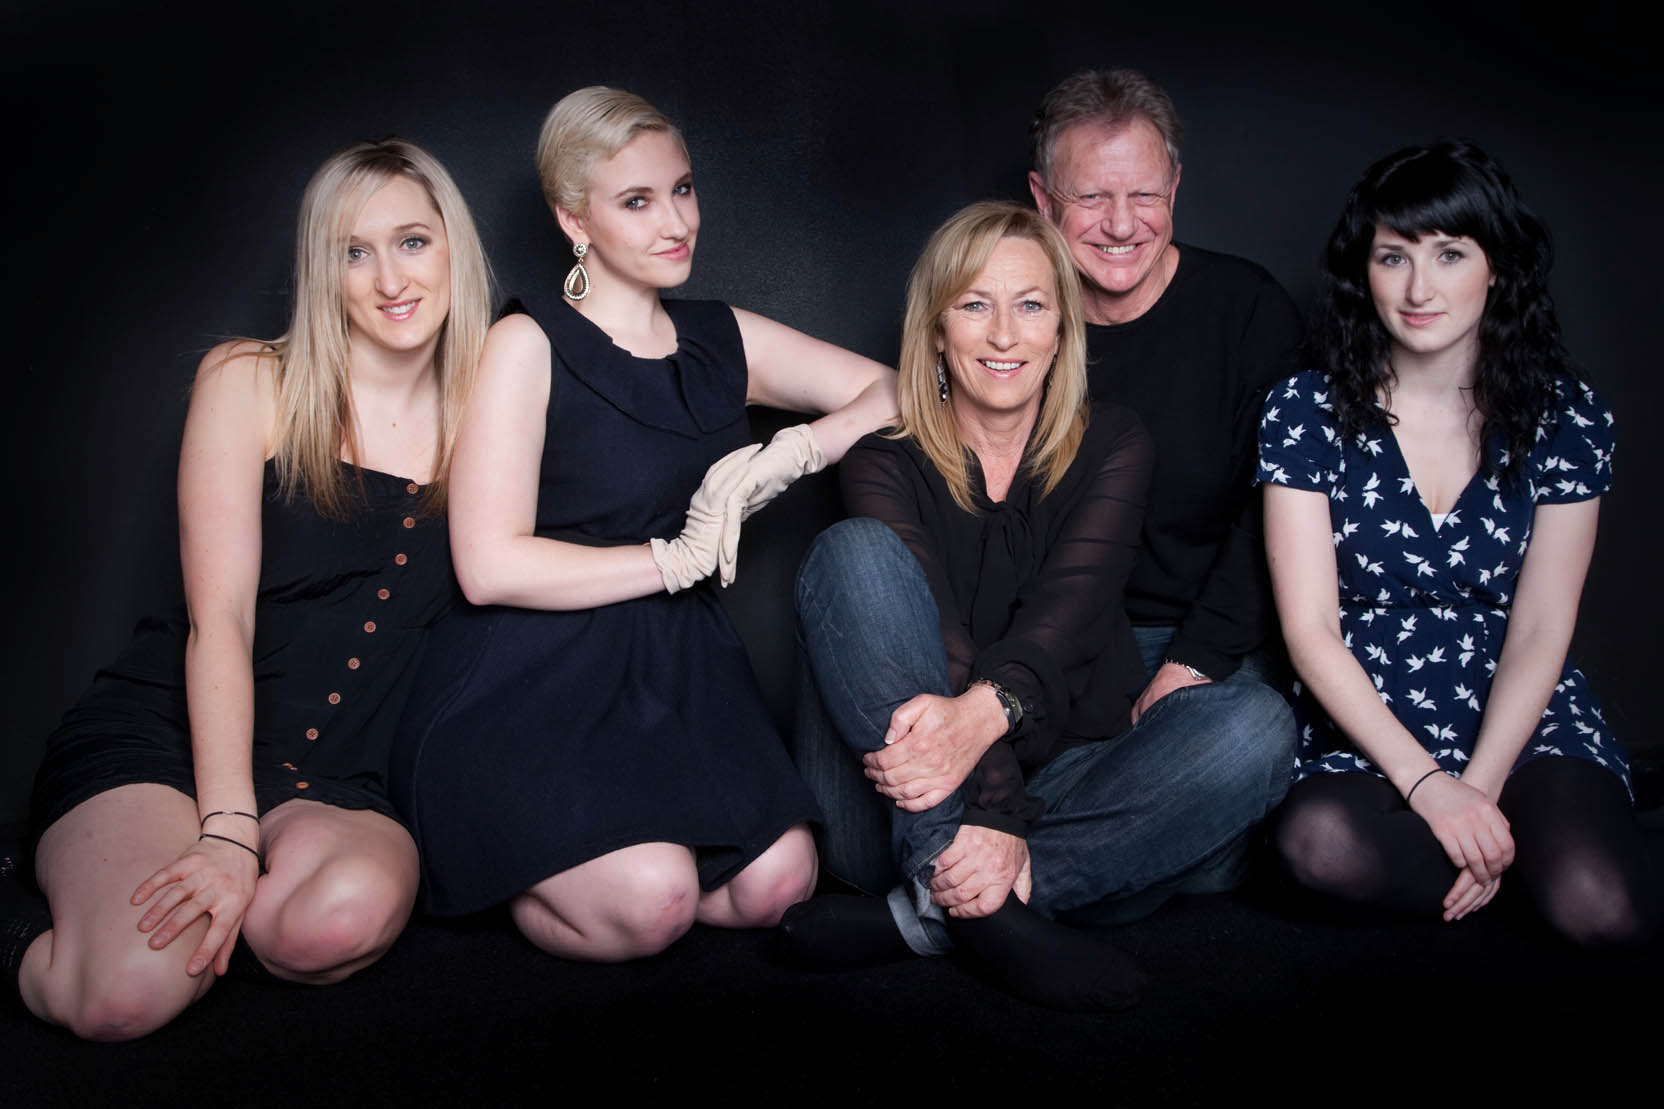 Family group portrait professional studio photography by Anais Chaine in Auckland Ponsonby New Zealand